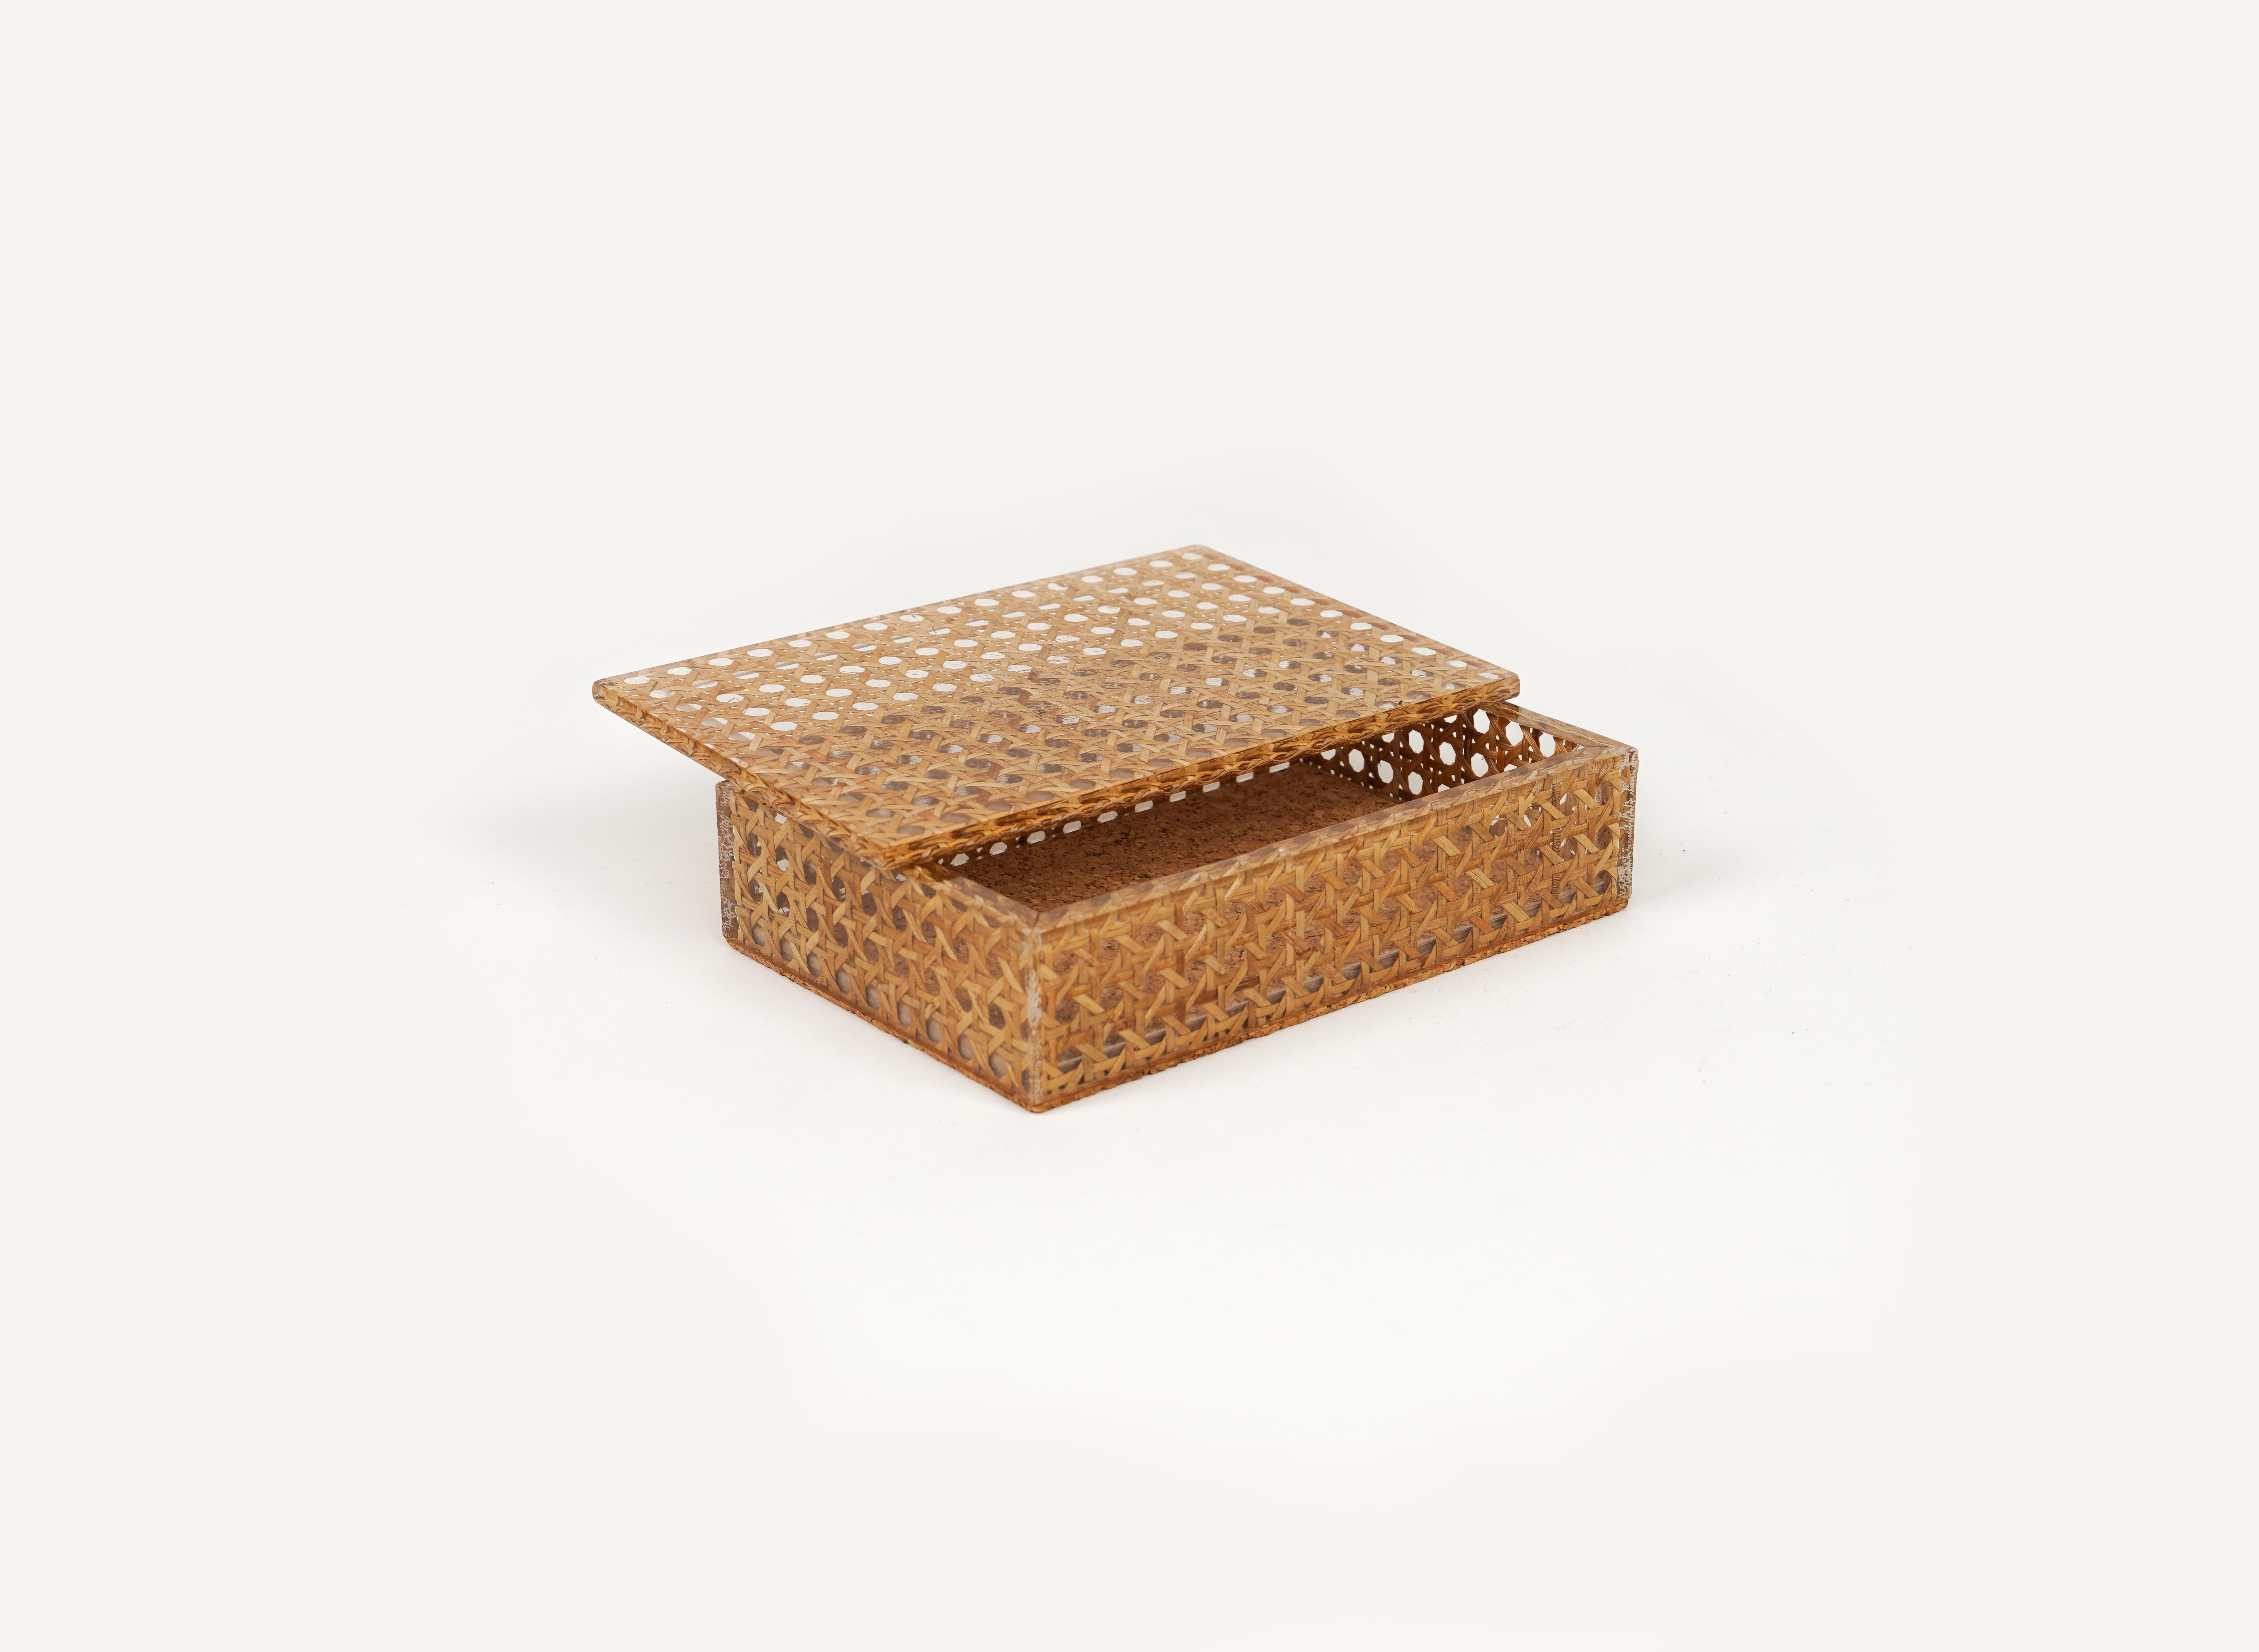 Late 20th Century Midcentury Box in Rattan, Lucite and Cork Christian Dior Style, Italy 1970s For Sale